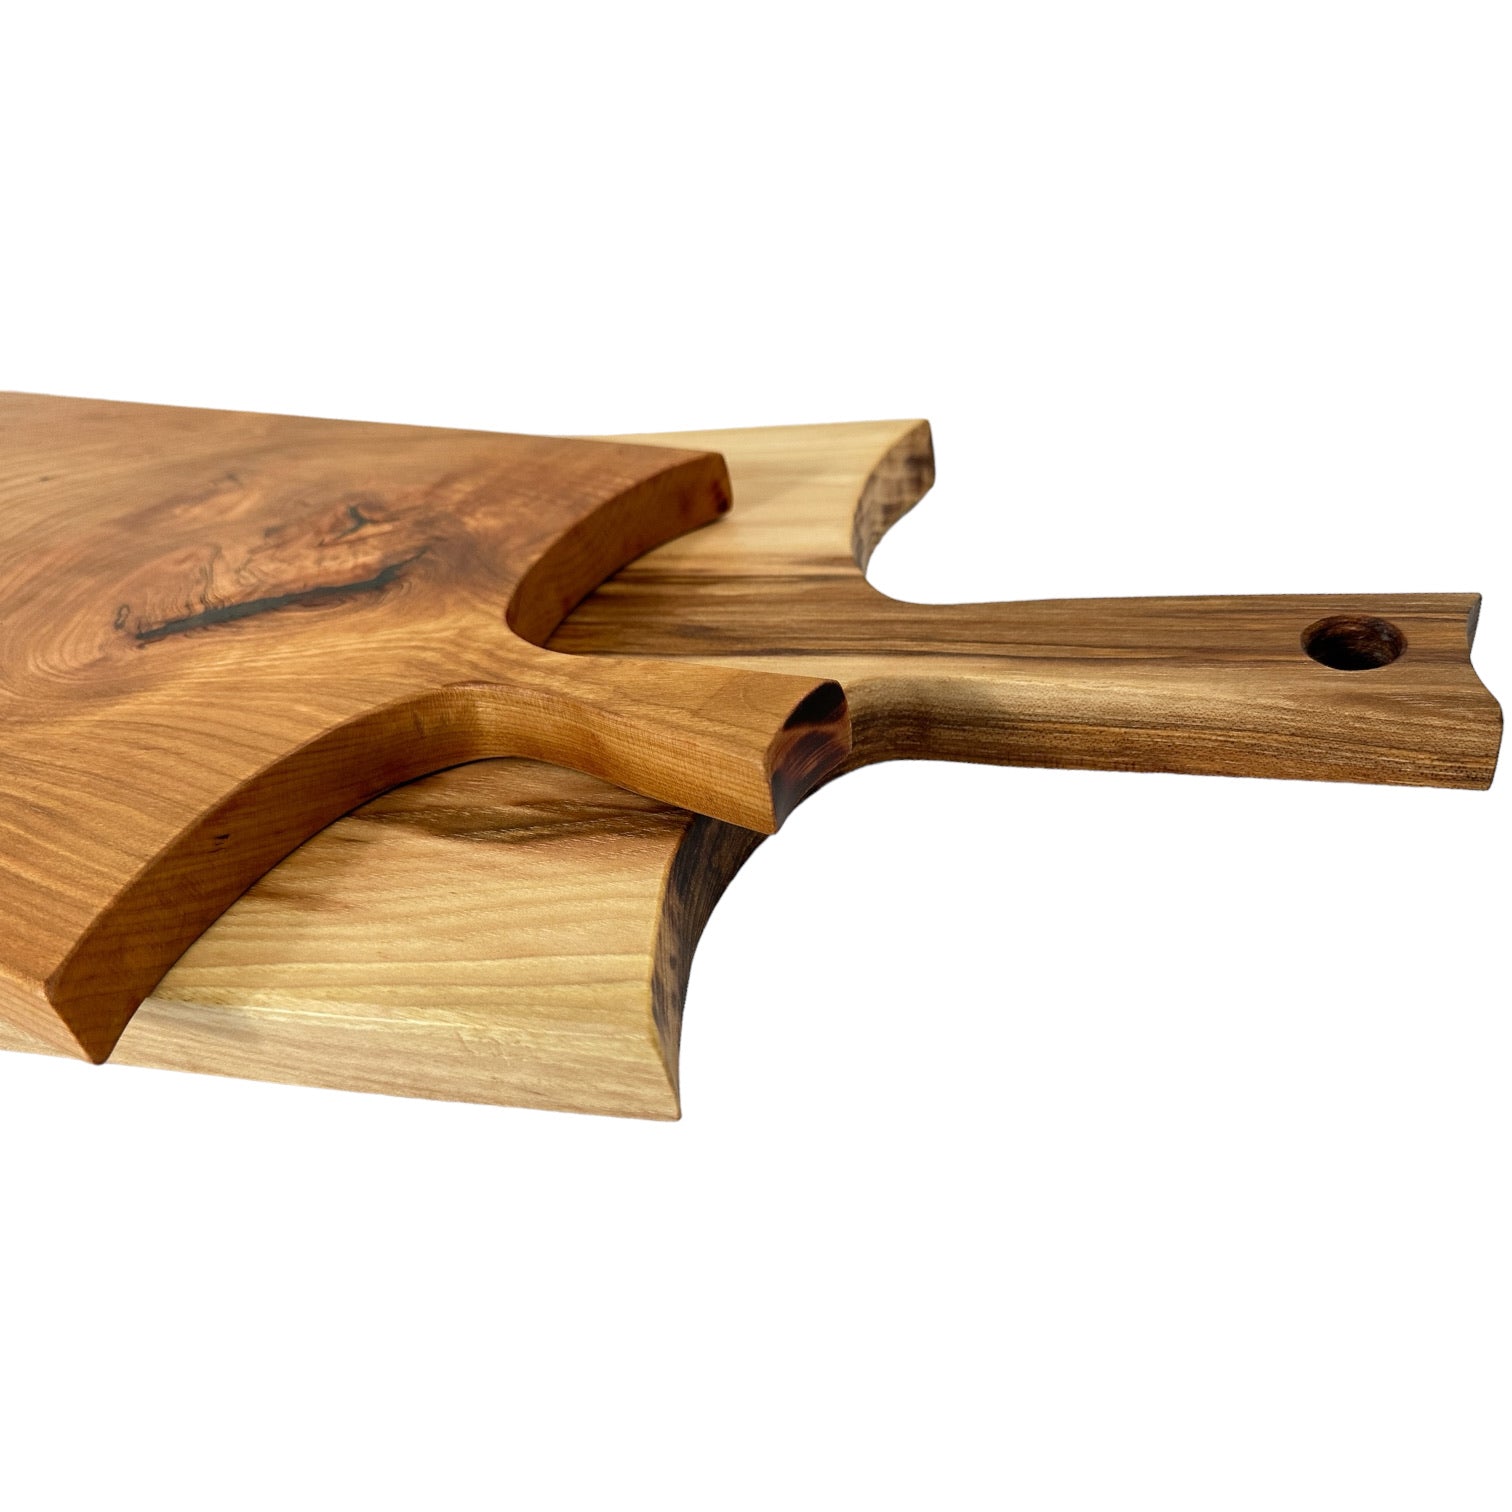 Rustic Handmade Wooden Charcuterie Boards - RTS hickory and cherry handles detail view